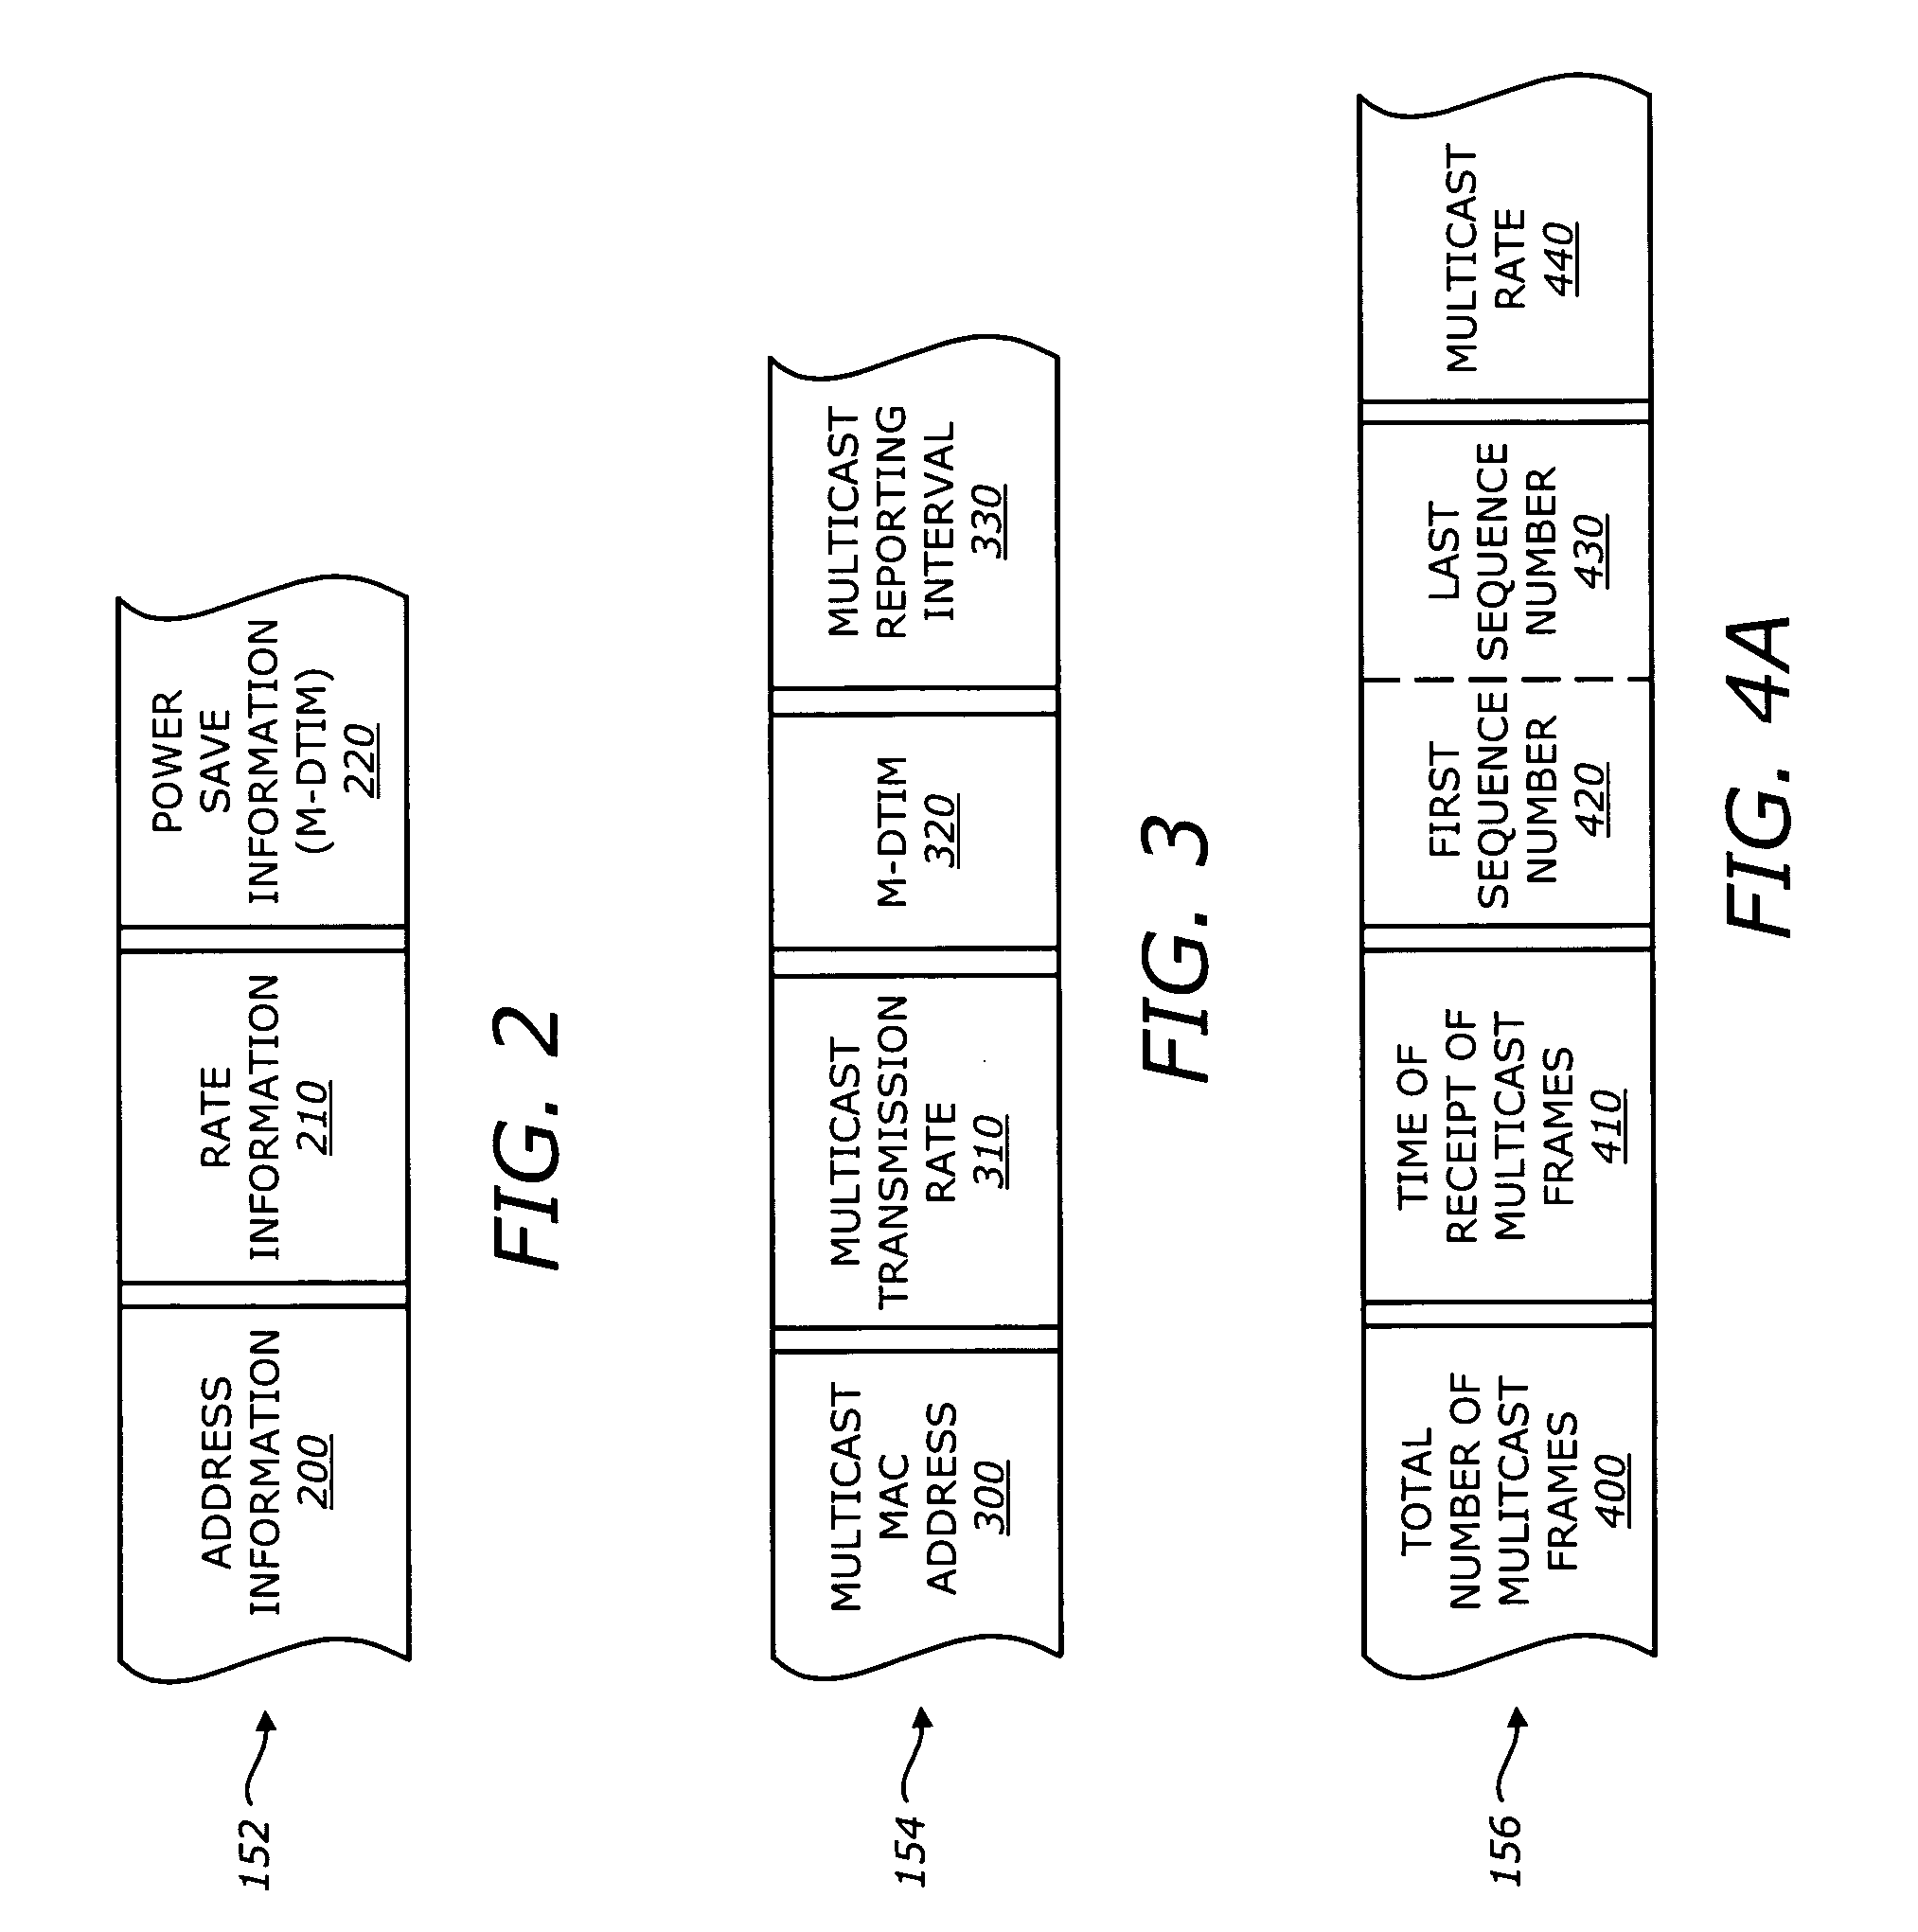 System and method for reliable multicast over shared wireless media for spectrum efficiency and battery power conservation